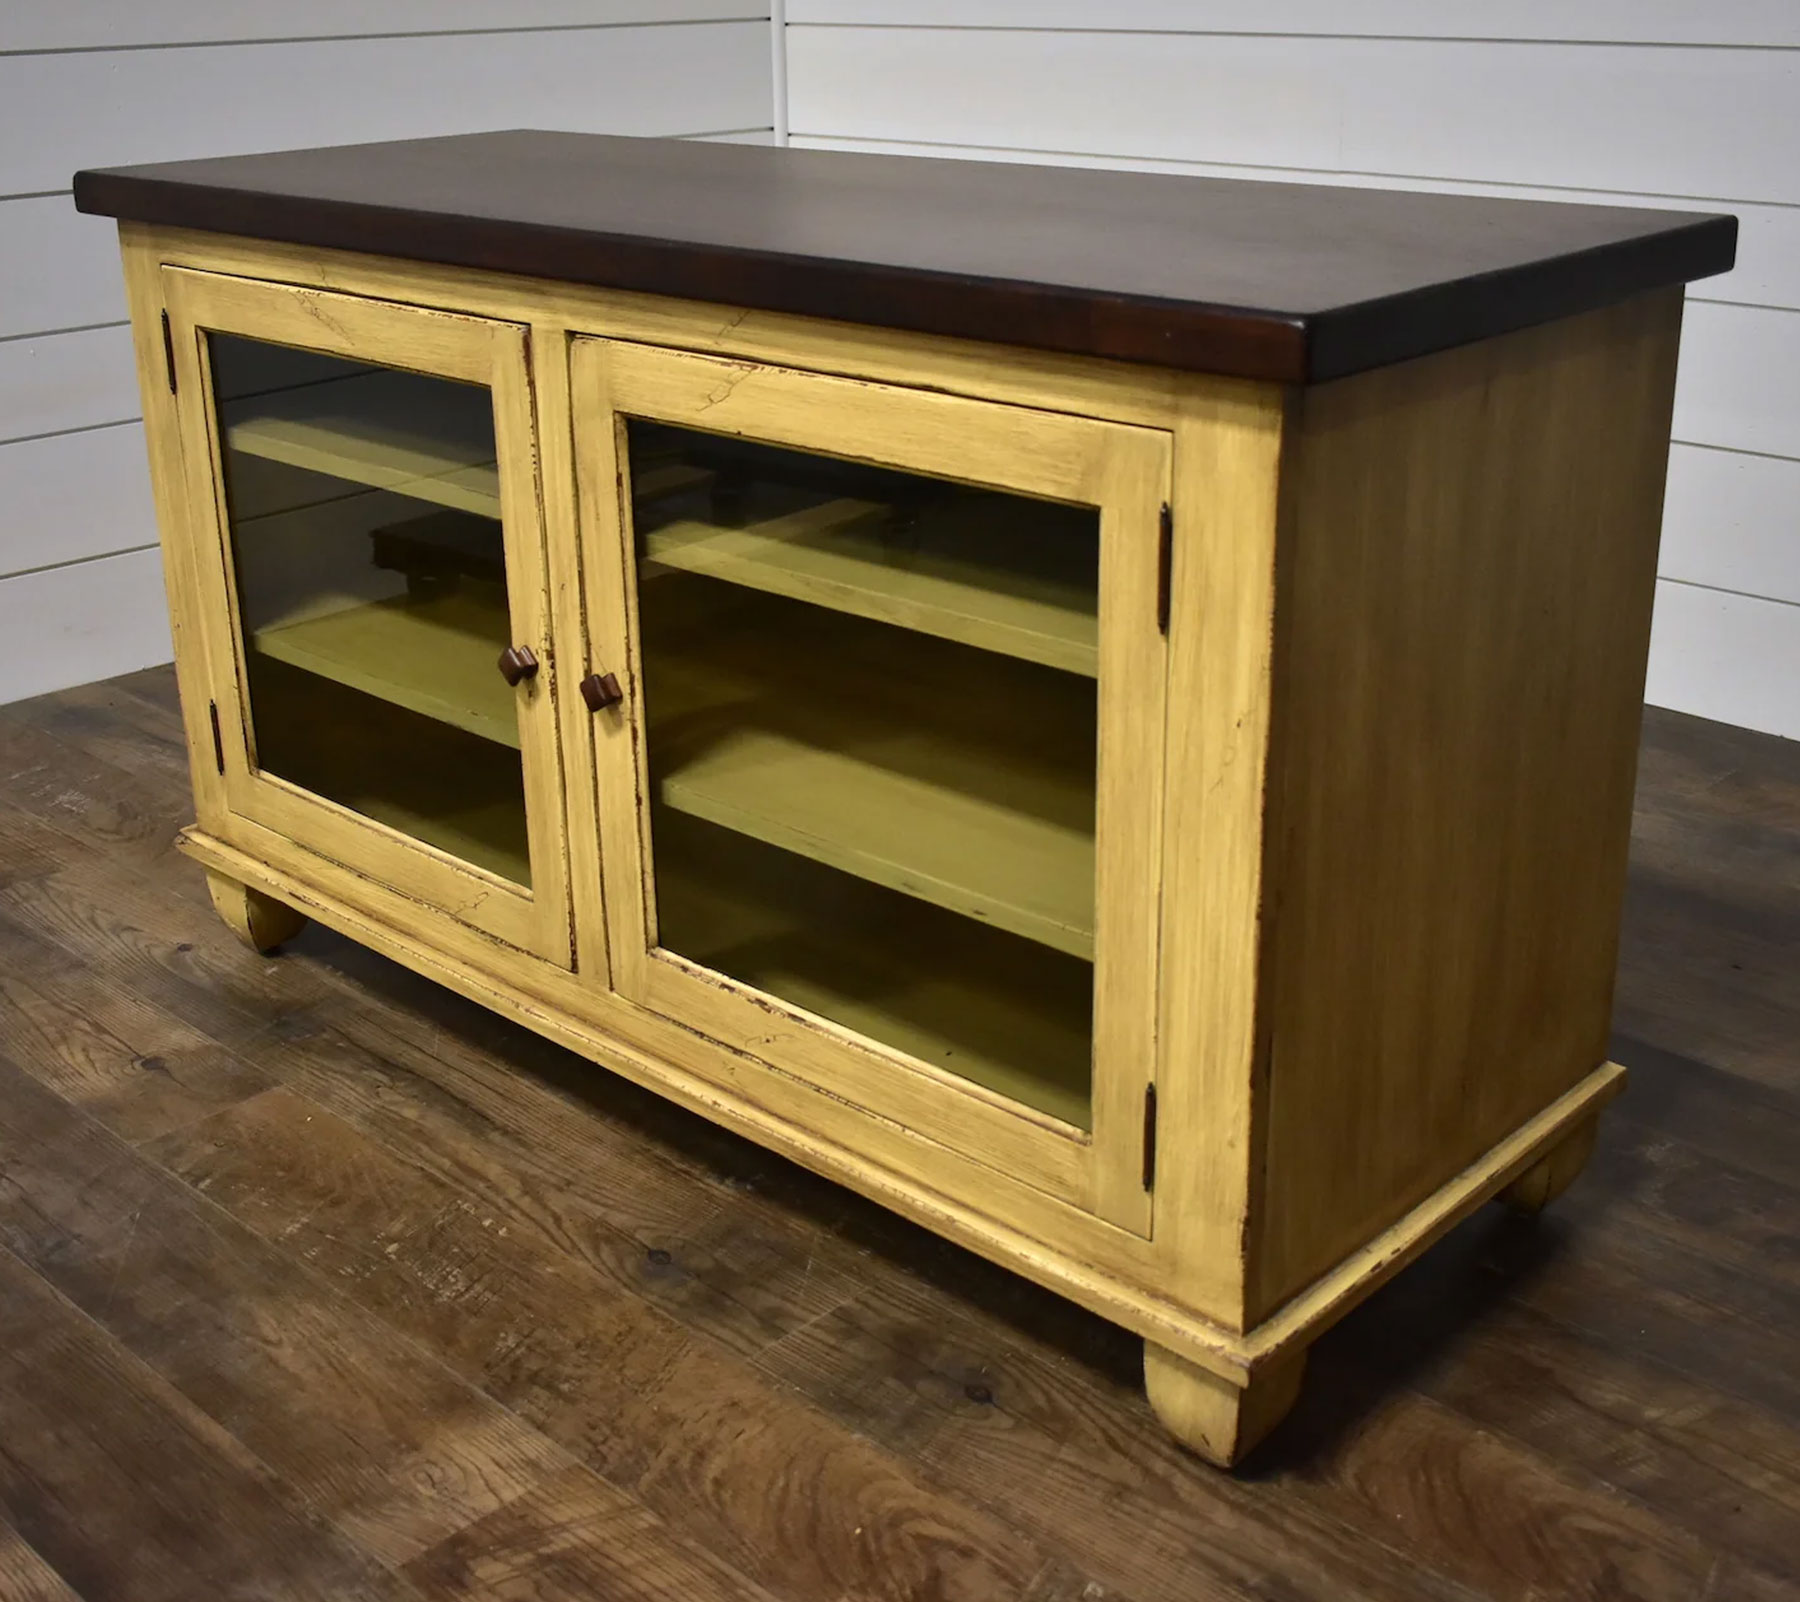 TV Stand #352 in Brown Maple